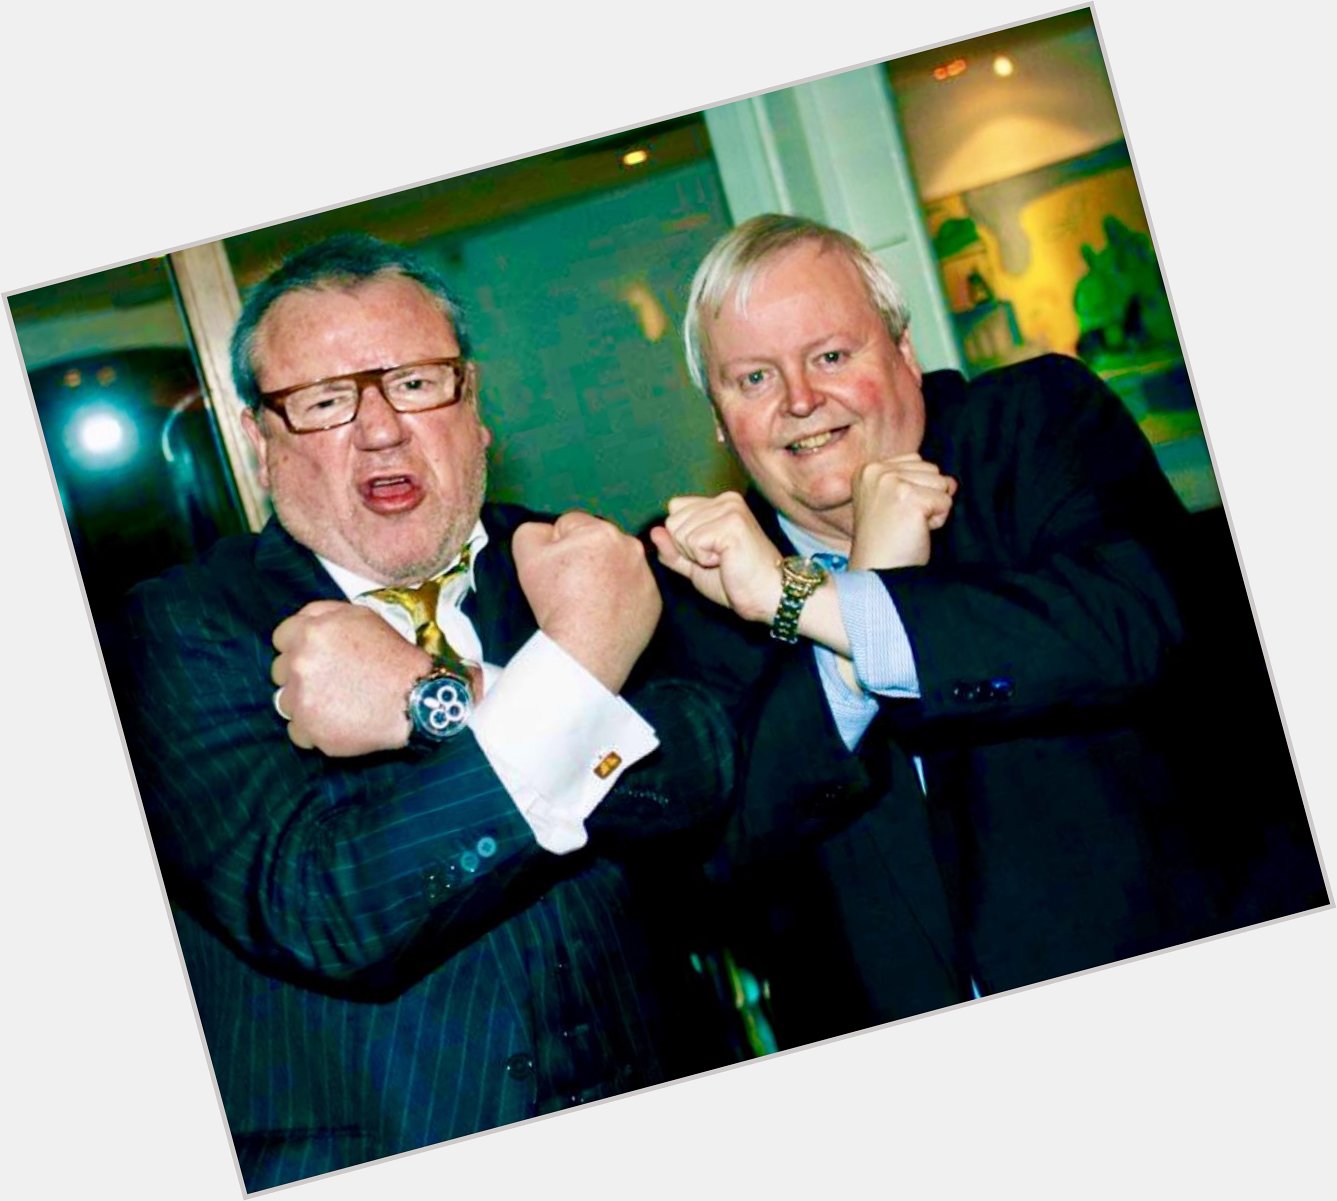 Happy Birthday to my old pal Ray Winstone, have a brilliant day mate! 